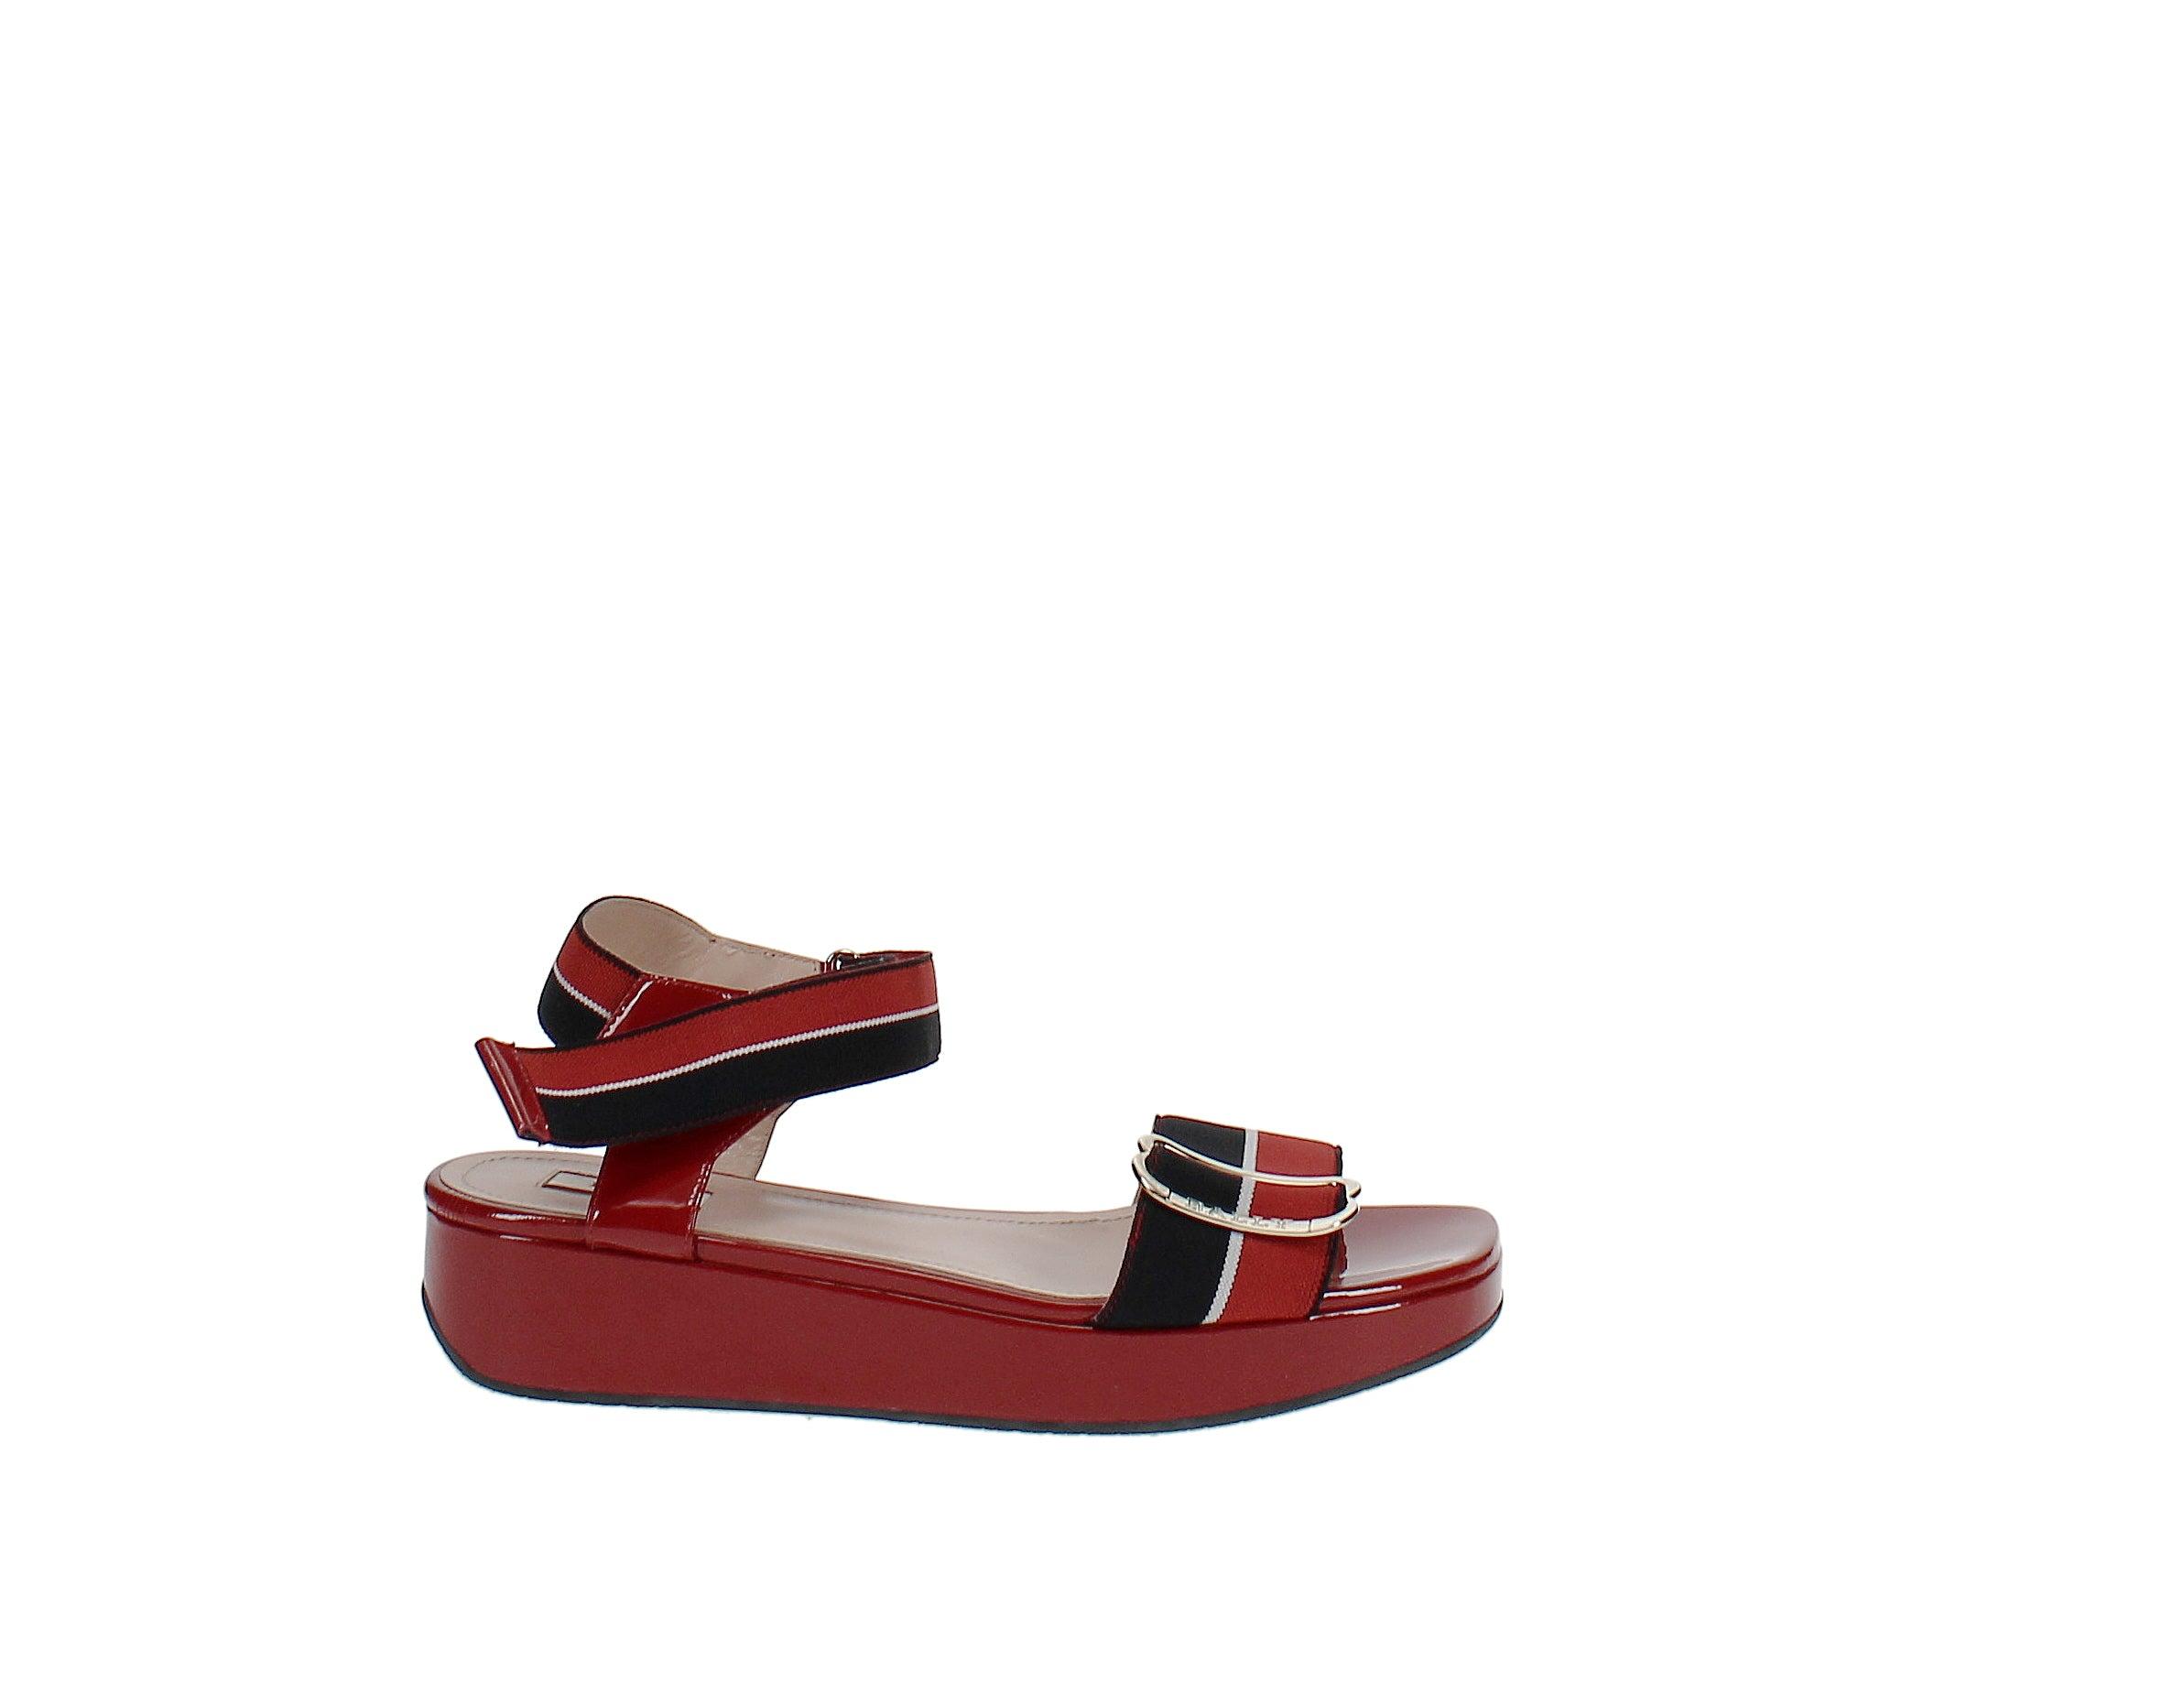 Bally Synthetic Joelle Wedge Sandals in Red/Blue/White (Red) - Lyst